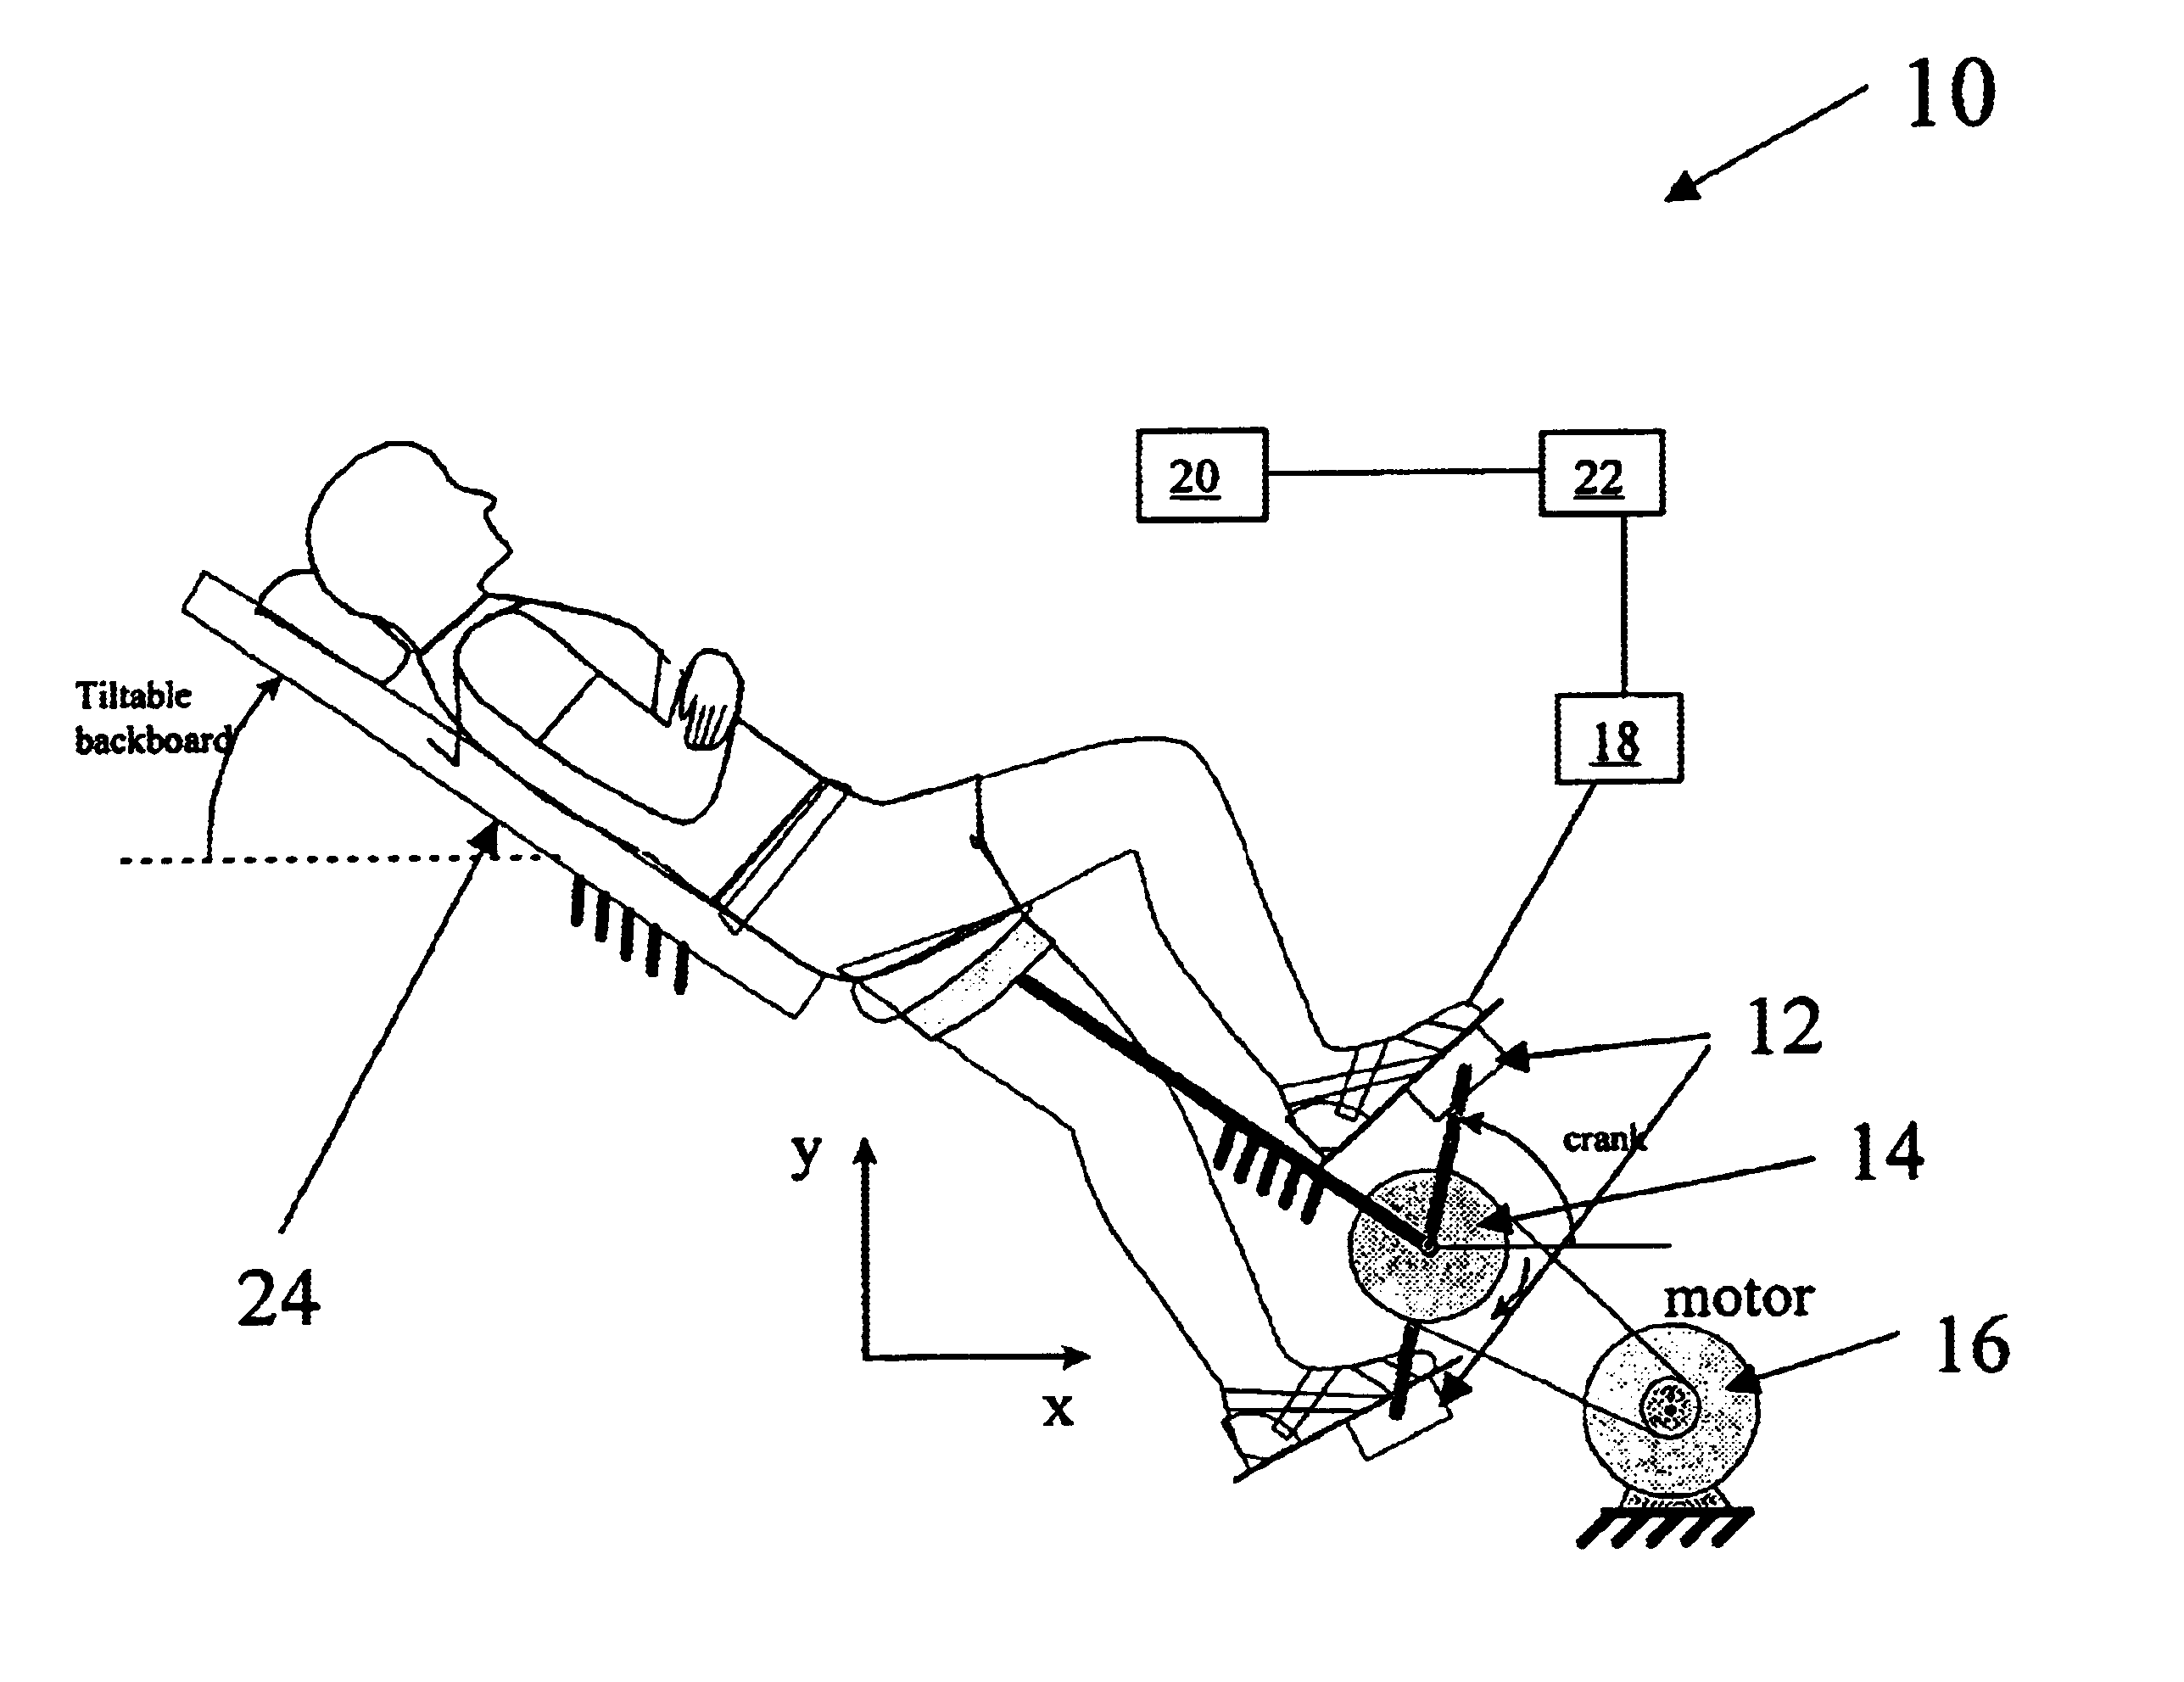 Methods and system for assessing limb position sense during movement